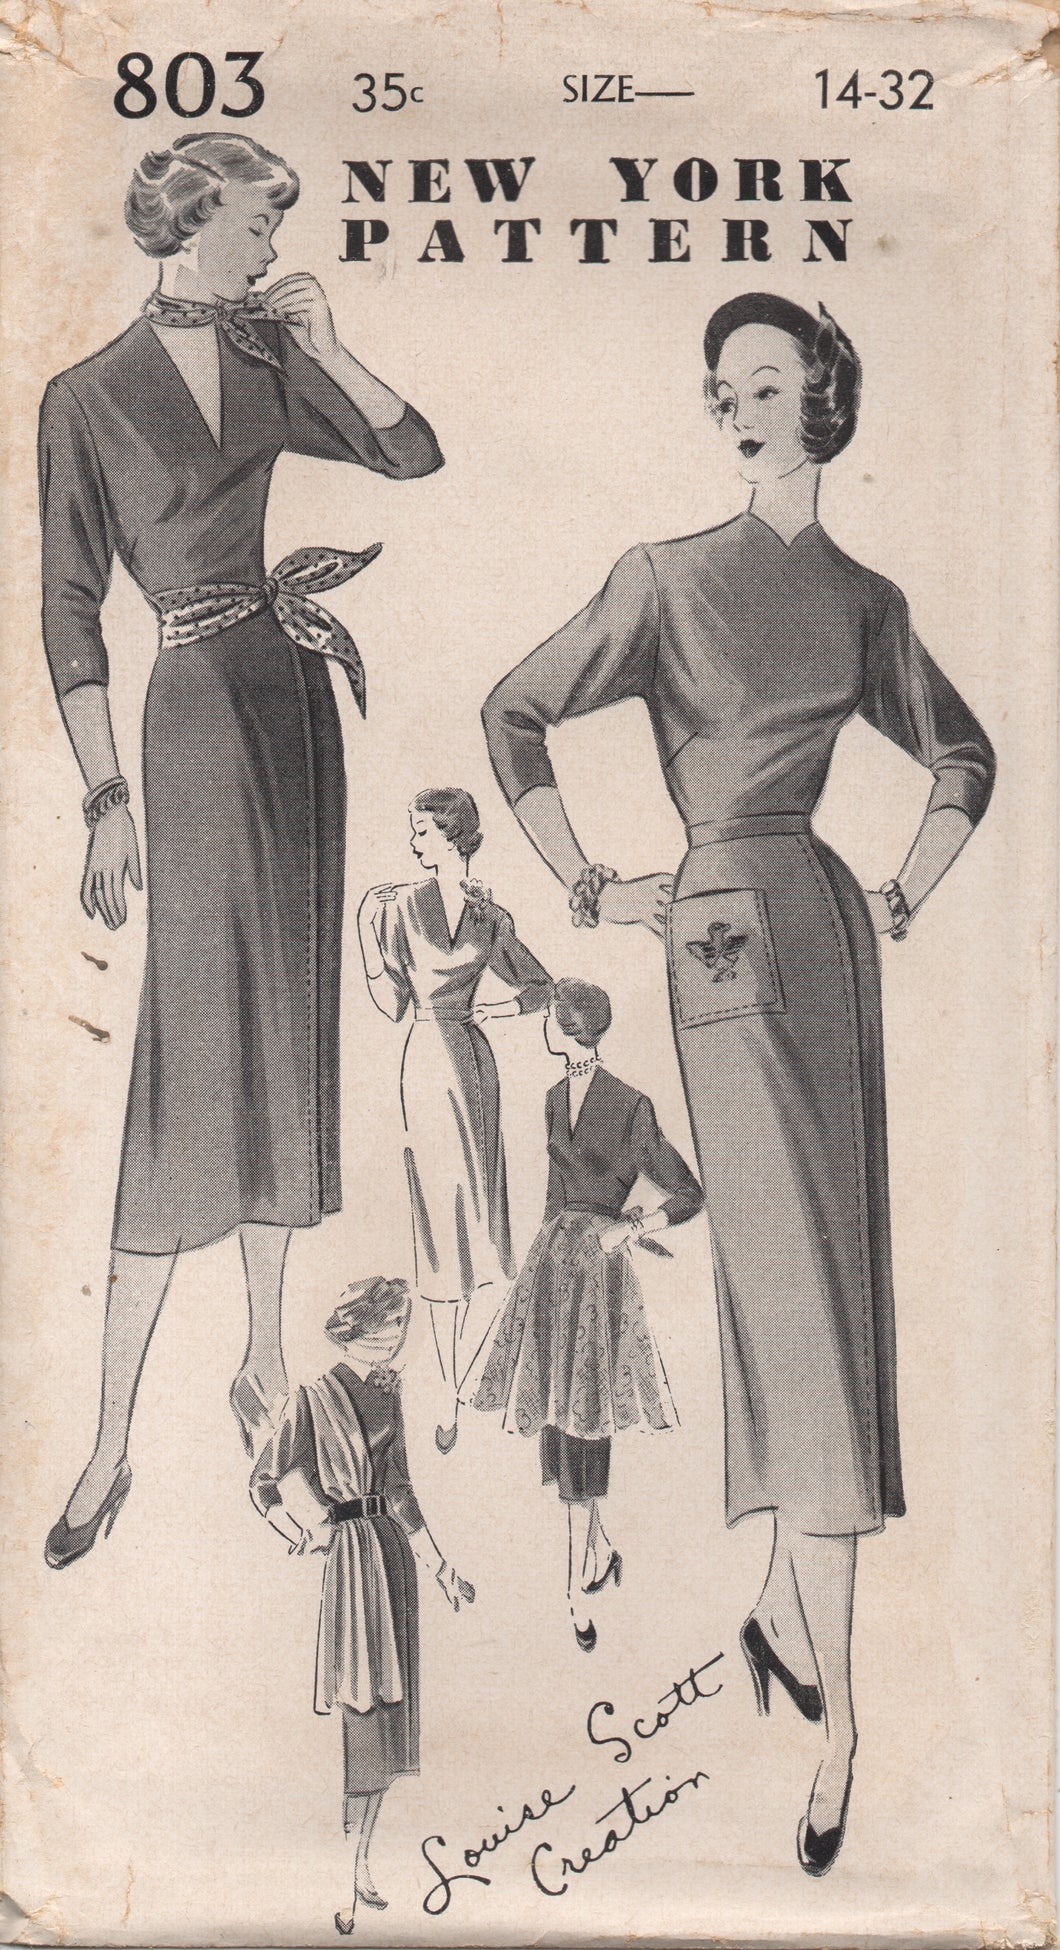 1950's New York One Piece Dress with Side Plait Skirt, Apron and Scarf - Bust 32